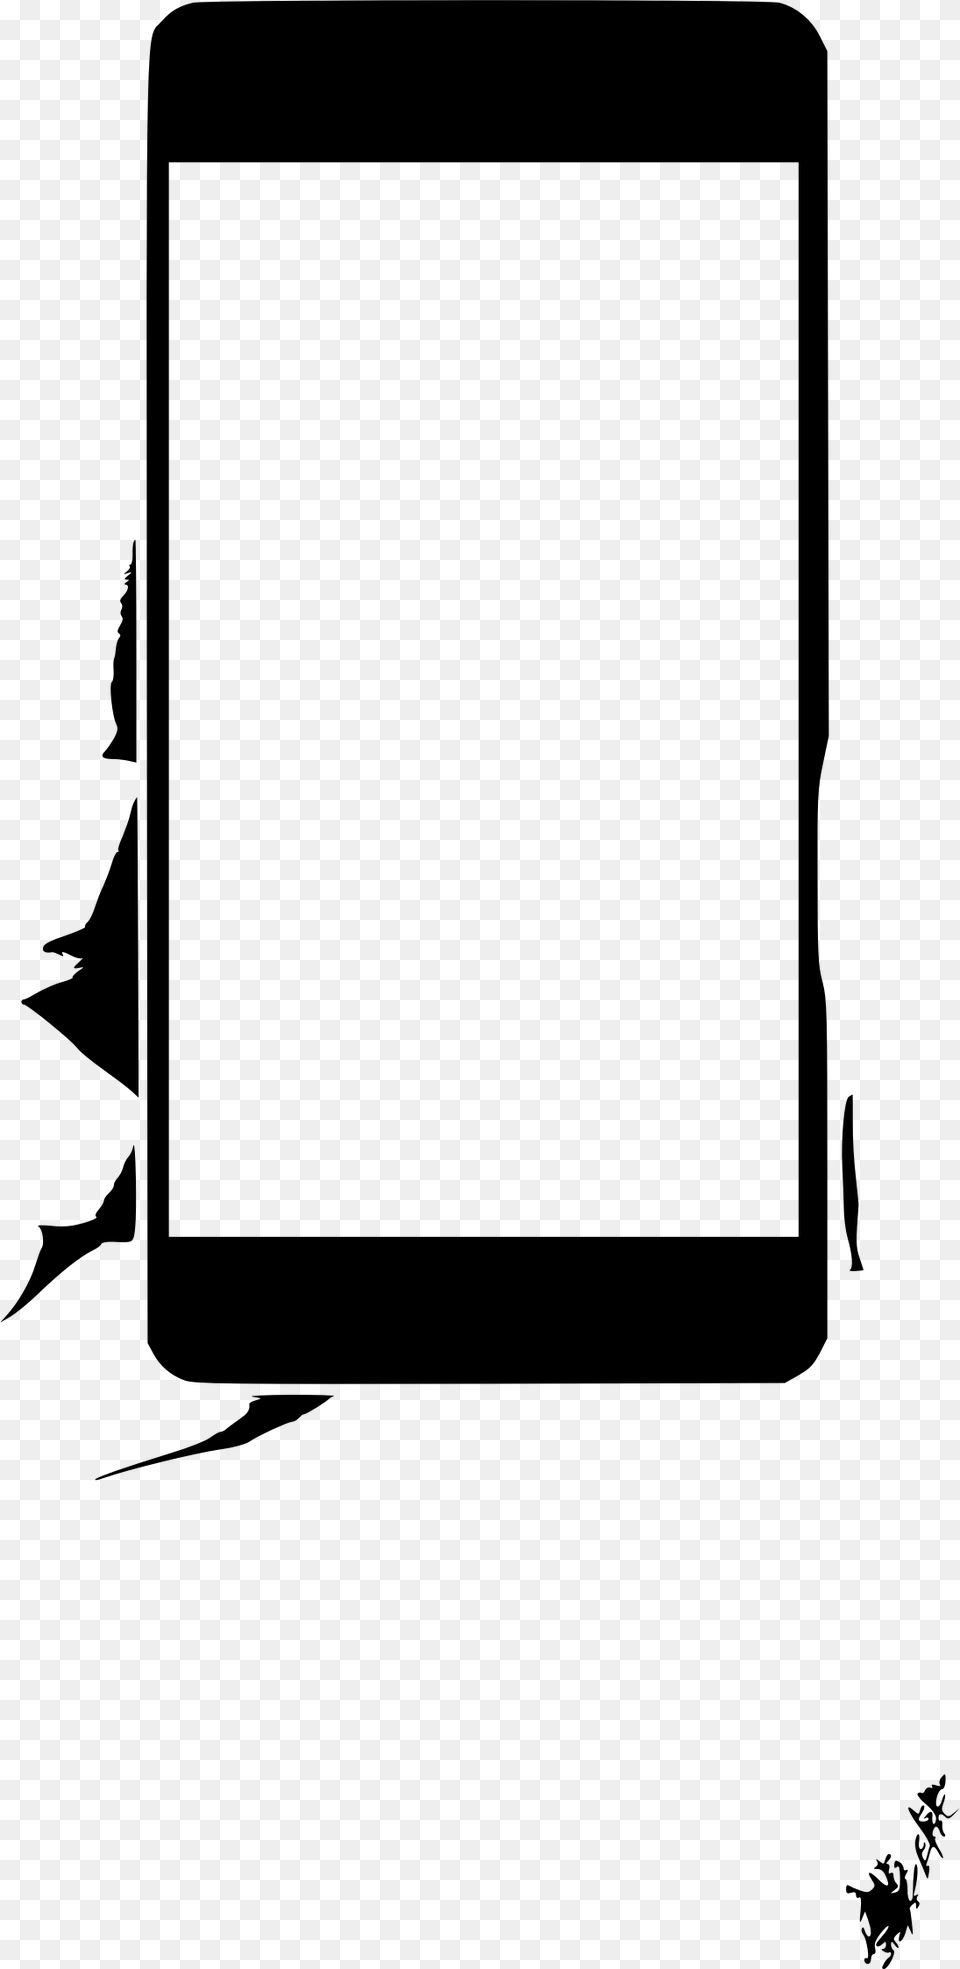 This Free Icons Design Of Mobile In Hand, Gray Png Image